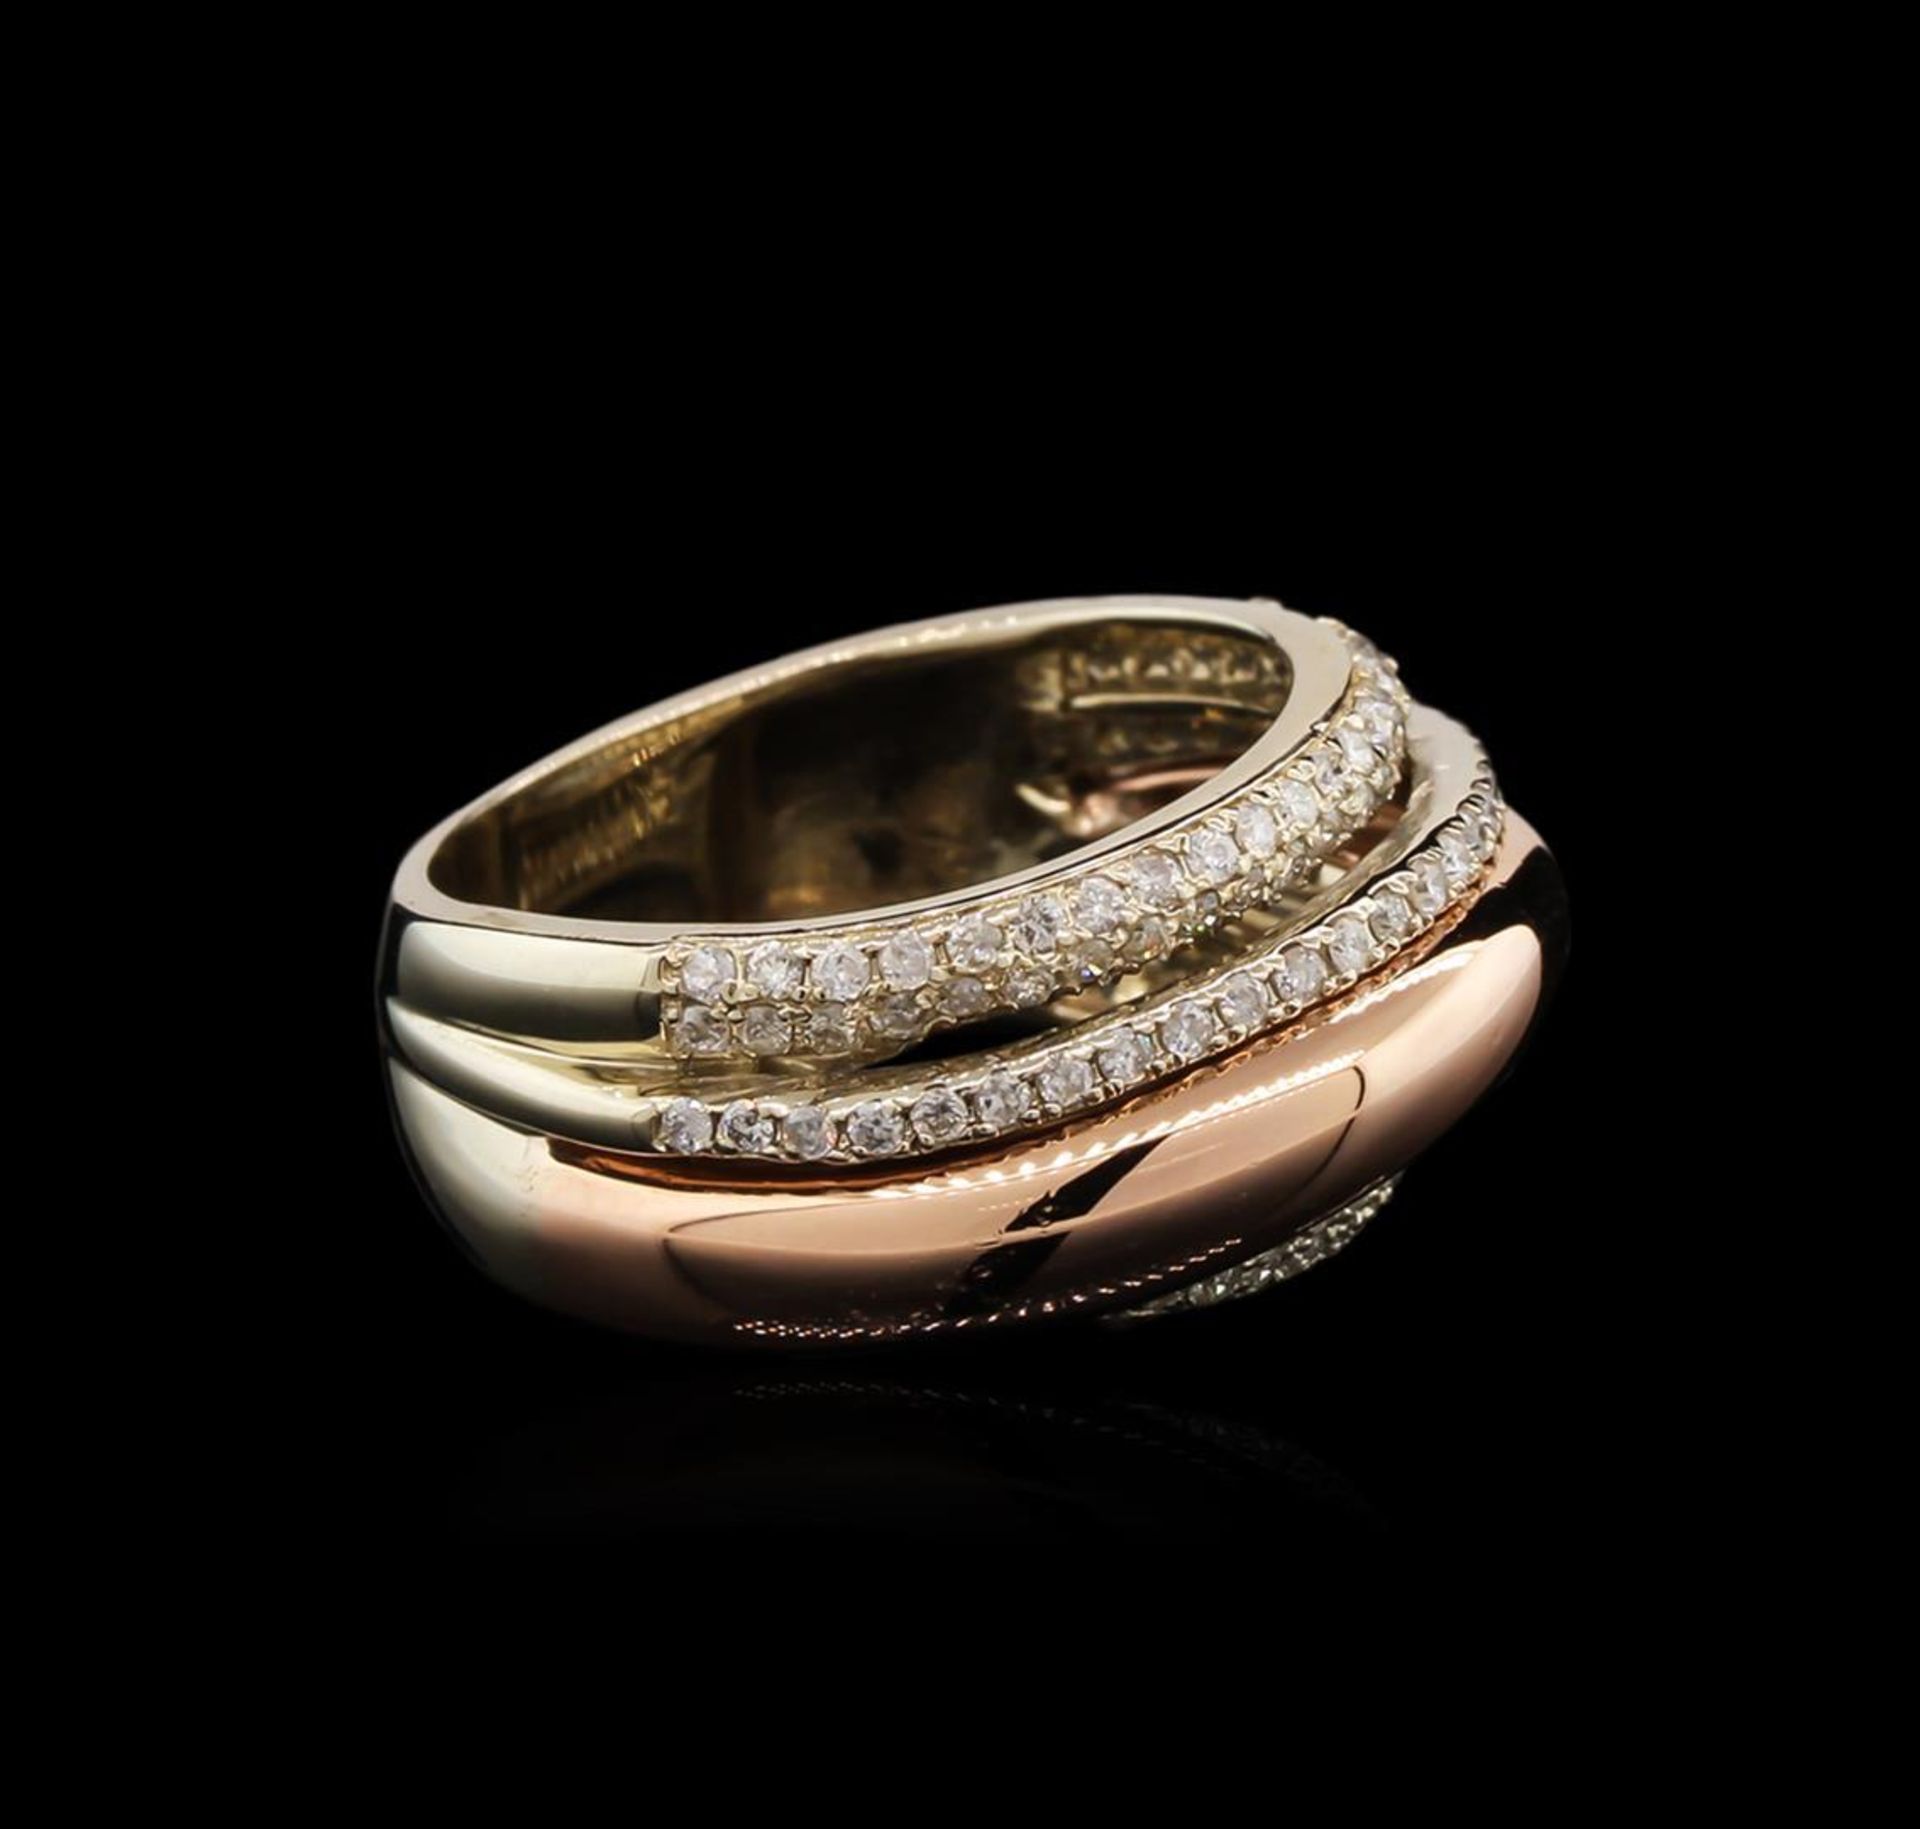 0.88 ctw Diamond Ring - 14KT Two-Tone Gold - Image 2 of 3